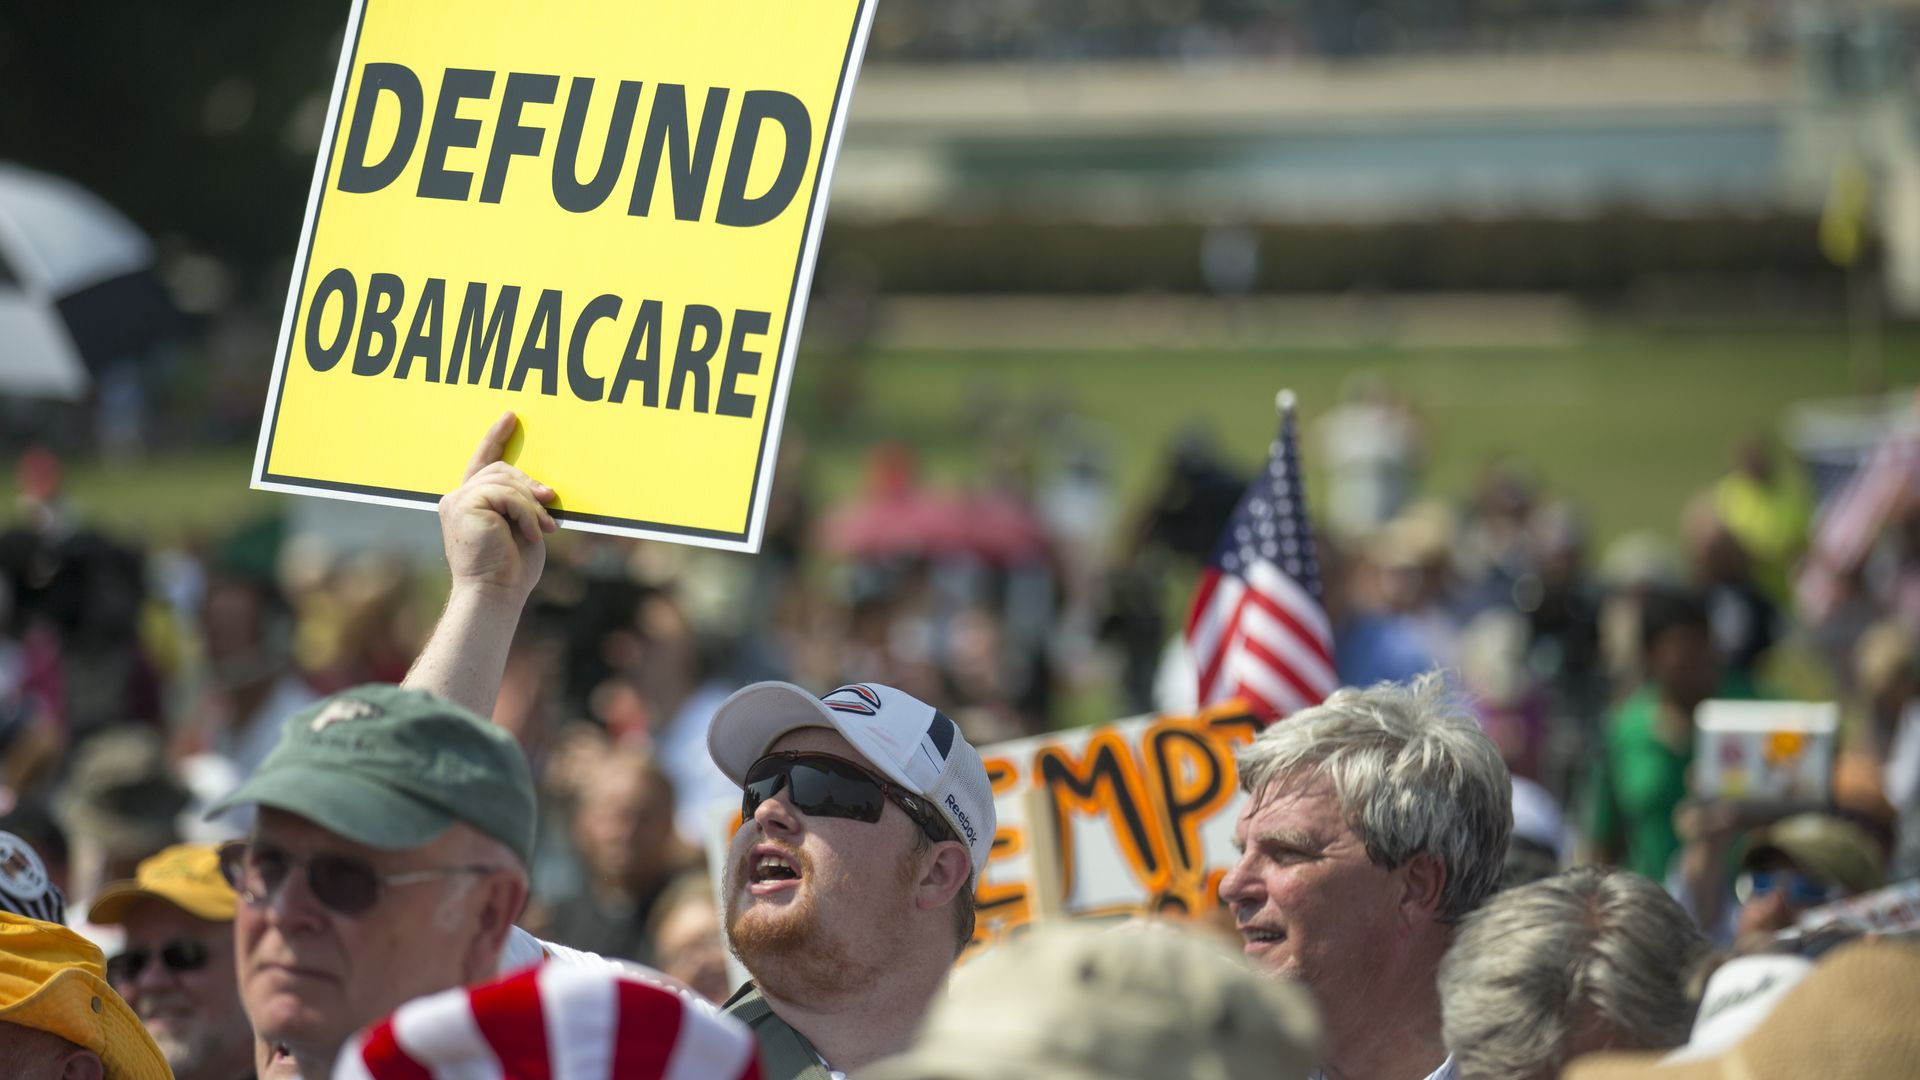 A crowd of people, with a man holding a sign that says "Defund Obamacare" 